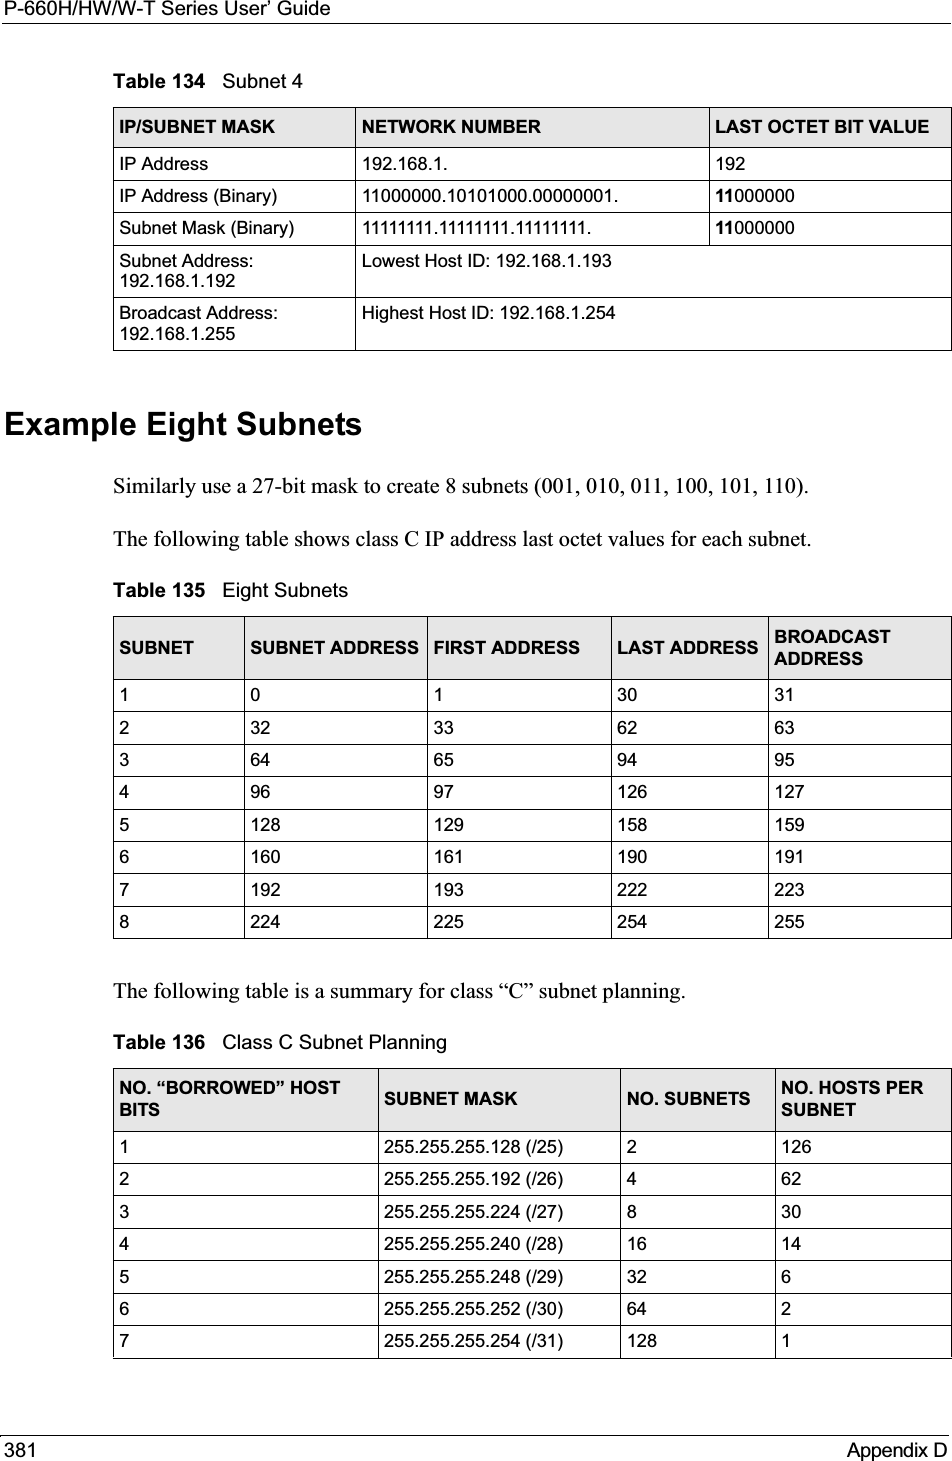 P-660H/HW/W-T Series User’ Guide381 Appendix DExample Eight SubnetsSimilarly use a 27-bit mask to create 8 subnets (001, 010, 011, 100, 101, 110). The following table shows class C IP address last octet values for each subnet.The following table is a summary for class “C” subnet planning.Table 134   Subnet 4IP/SUBNET MASK NETWORK NUMBER LAST OCTET BIT VALUEIP Address 192.168.1. 192IP Address (Binary) 11000000.10101000.00000001. 11000000Subnet Mask (Binary) 11111111.11111111.11111111. 11000000Subnet Address: 192.168.1.192Lowest Host ID: 192.168.1.193Broadcast Address: 192.168.1.255Highest Host ID: 192.168.1.254Table 135   Eight SubnetsSUBNET SUBNET ADDRESS FIRST ADDRESS LAST ADDRESS BROADCASTADDRESS1 0 1 30 31232 33 62 63364 65 94 95496 97 126 1275128 129 158 1596160 161 190 1917192 193 222 2238224 225 254 255Table 136   Class C Subnet PlanningNO. “BORROWED” HOST BITS SUBNET MASK NO. SUBNETS NO. HOSTS PER SUBNET1255.255.255.128 (/25) 21262255.255.255.192 (/26) 4623255.255.255.224 (/27) 8304255.255.255.240 (/28) 16 145255.255.255.248 (/29) 32 66255.255.255.252 (/30) 64 27255.255.255.254 (/31) 128 1